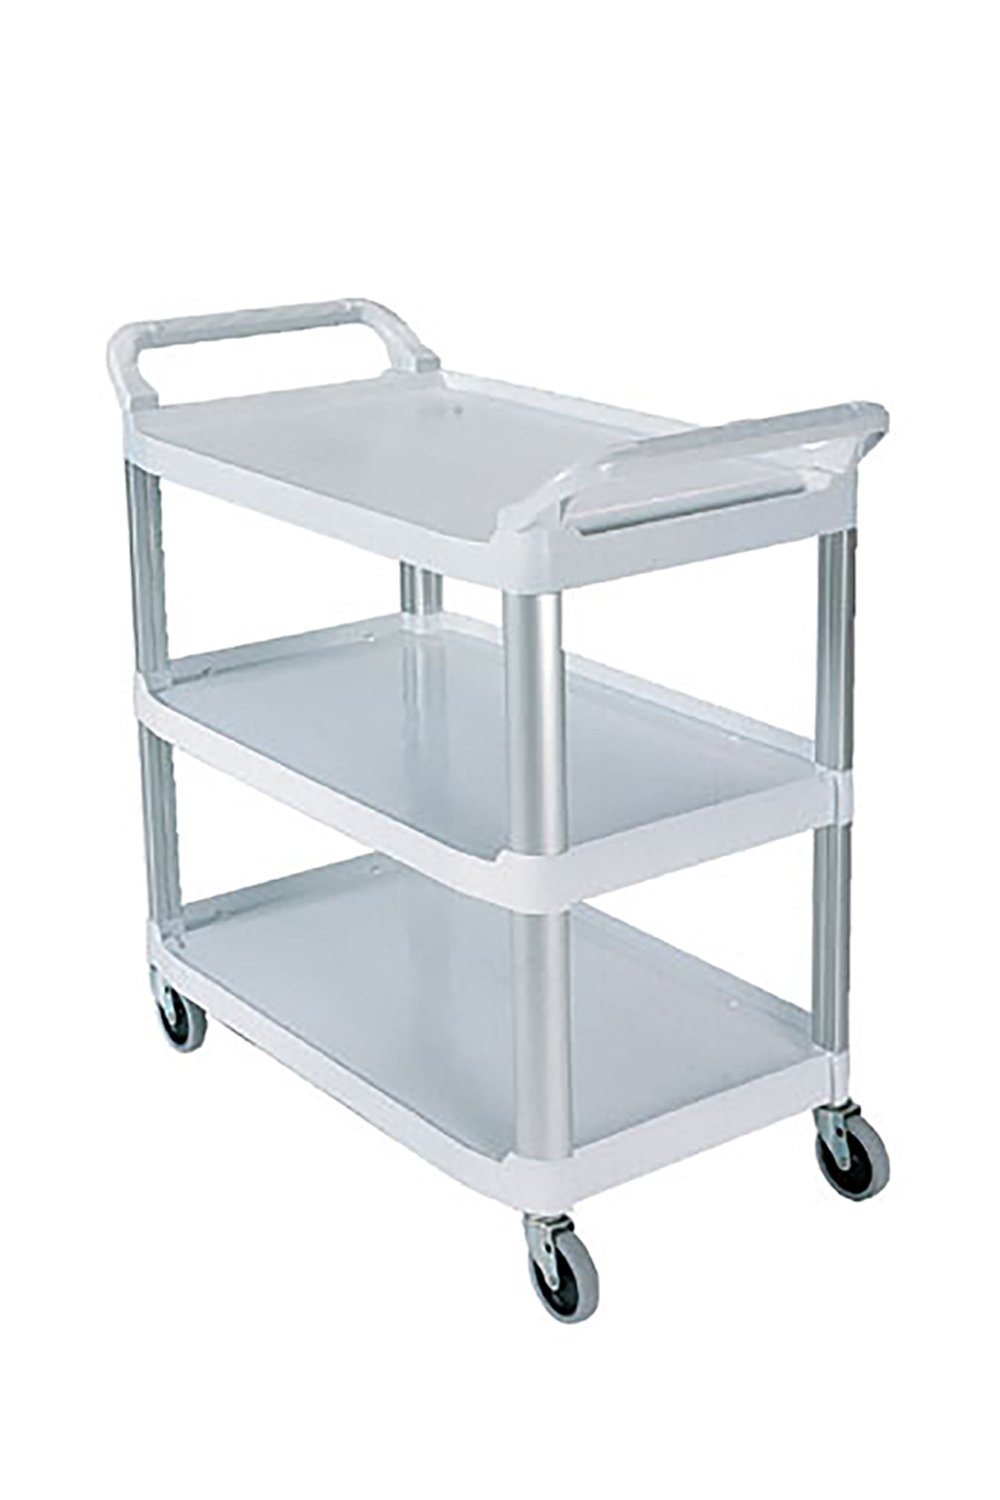 Open Sided Xtra Cart Transport & Utility Carts Rubbermaid 20"D x 40.63"W x 37.8"H Lockable Doors, Sliding Drawer Off White